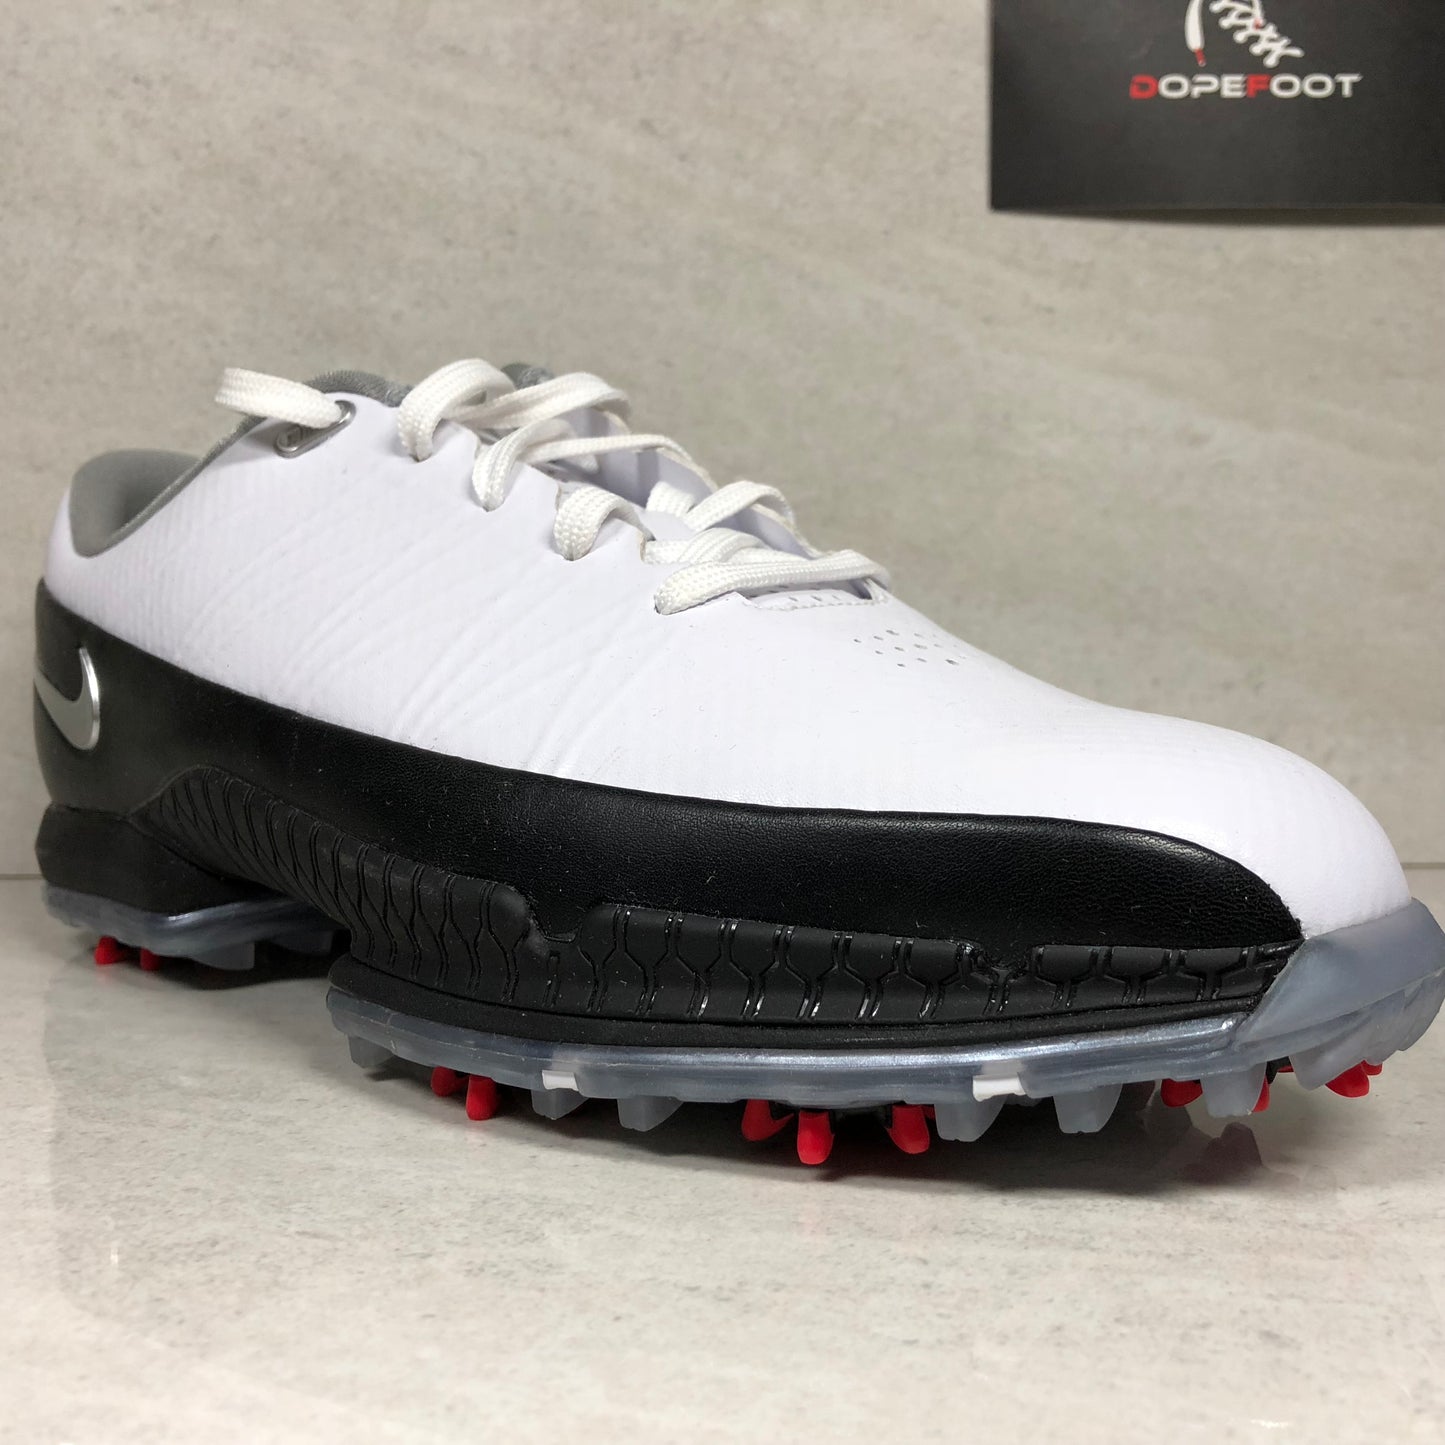 DS Nike Air Zoom Attack Golf Shoes Size 9 White/Black 853739 101